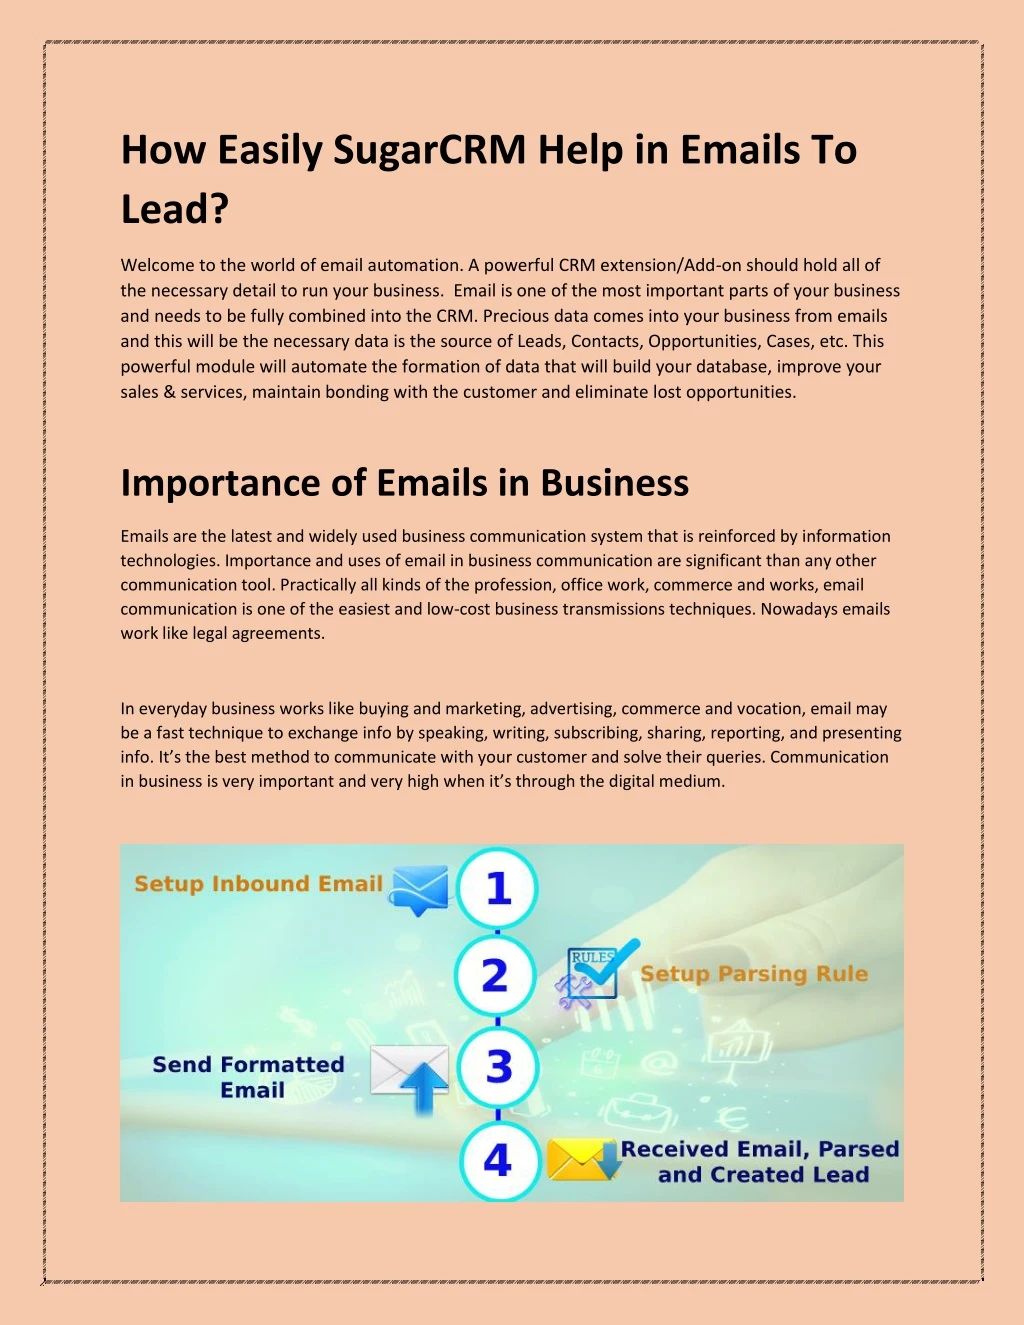 how easily sugarcrm help in emails to lead